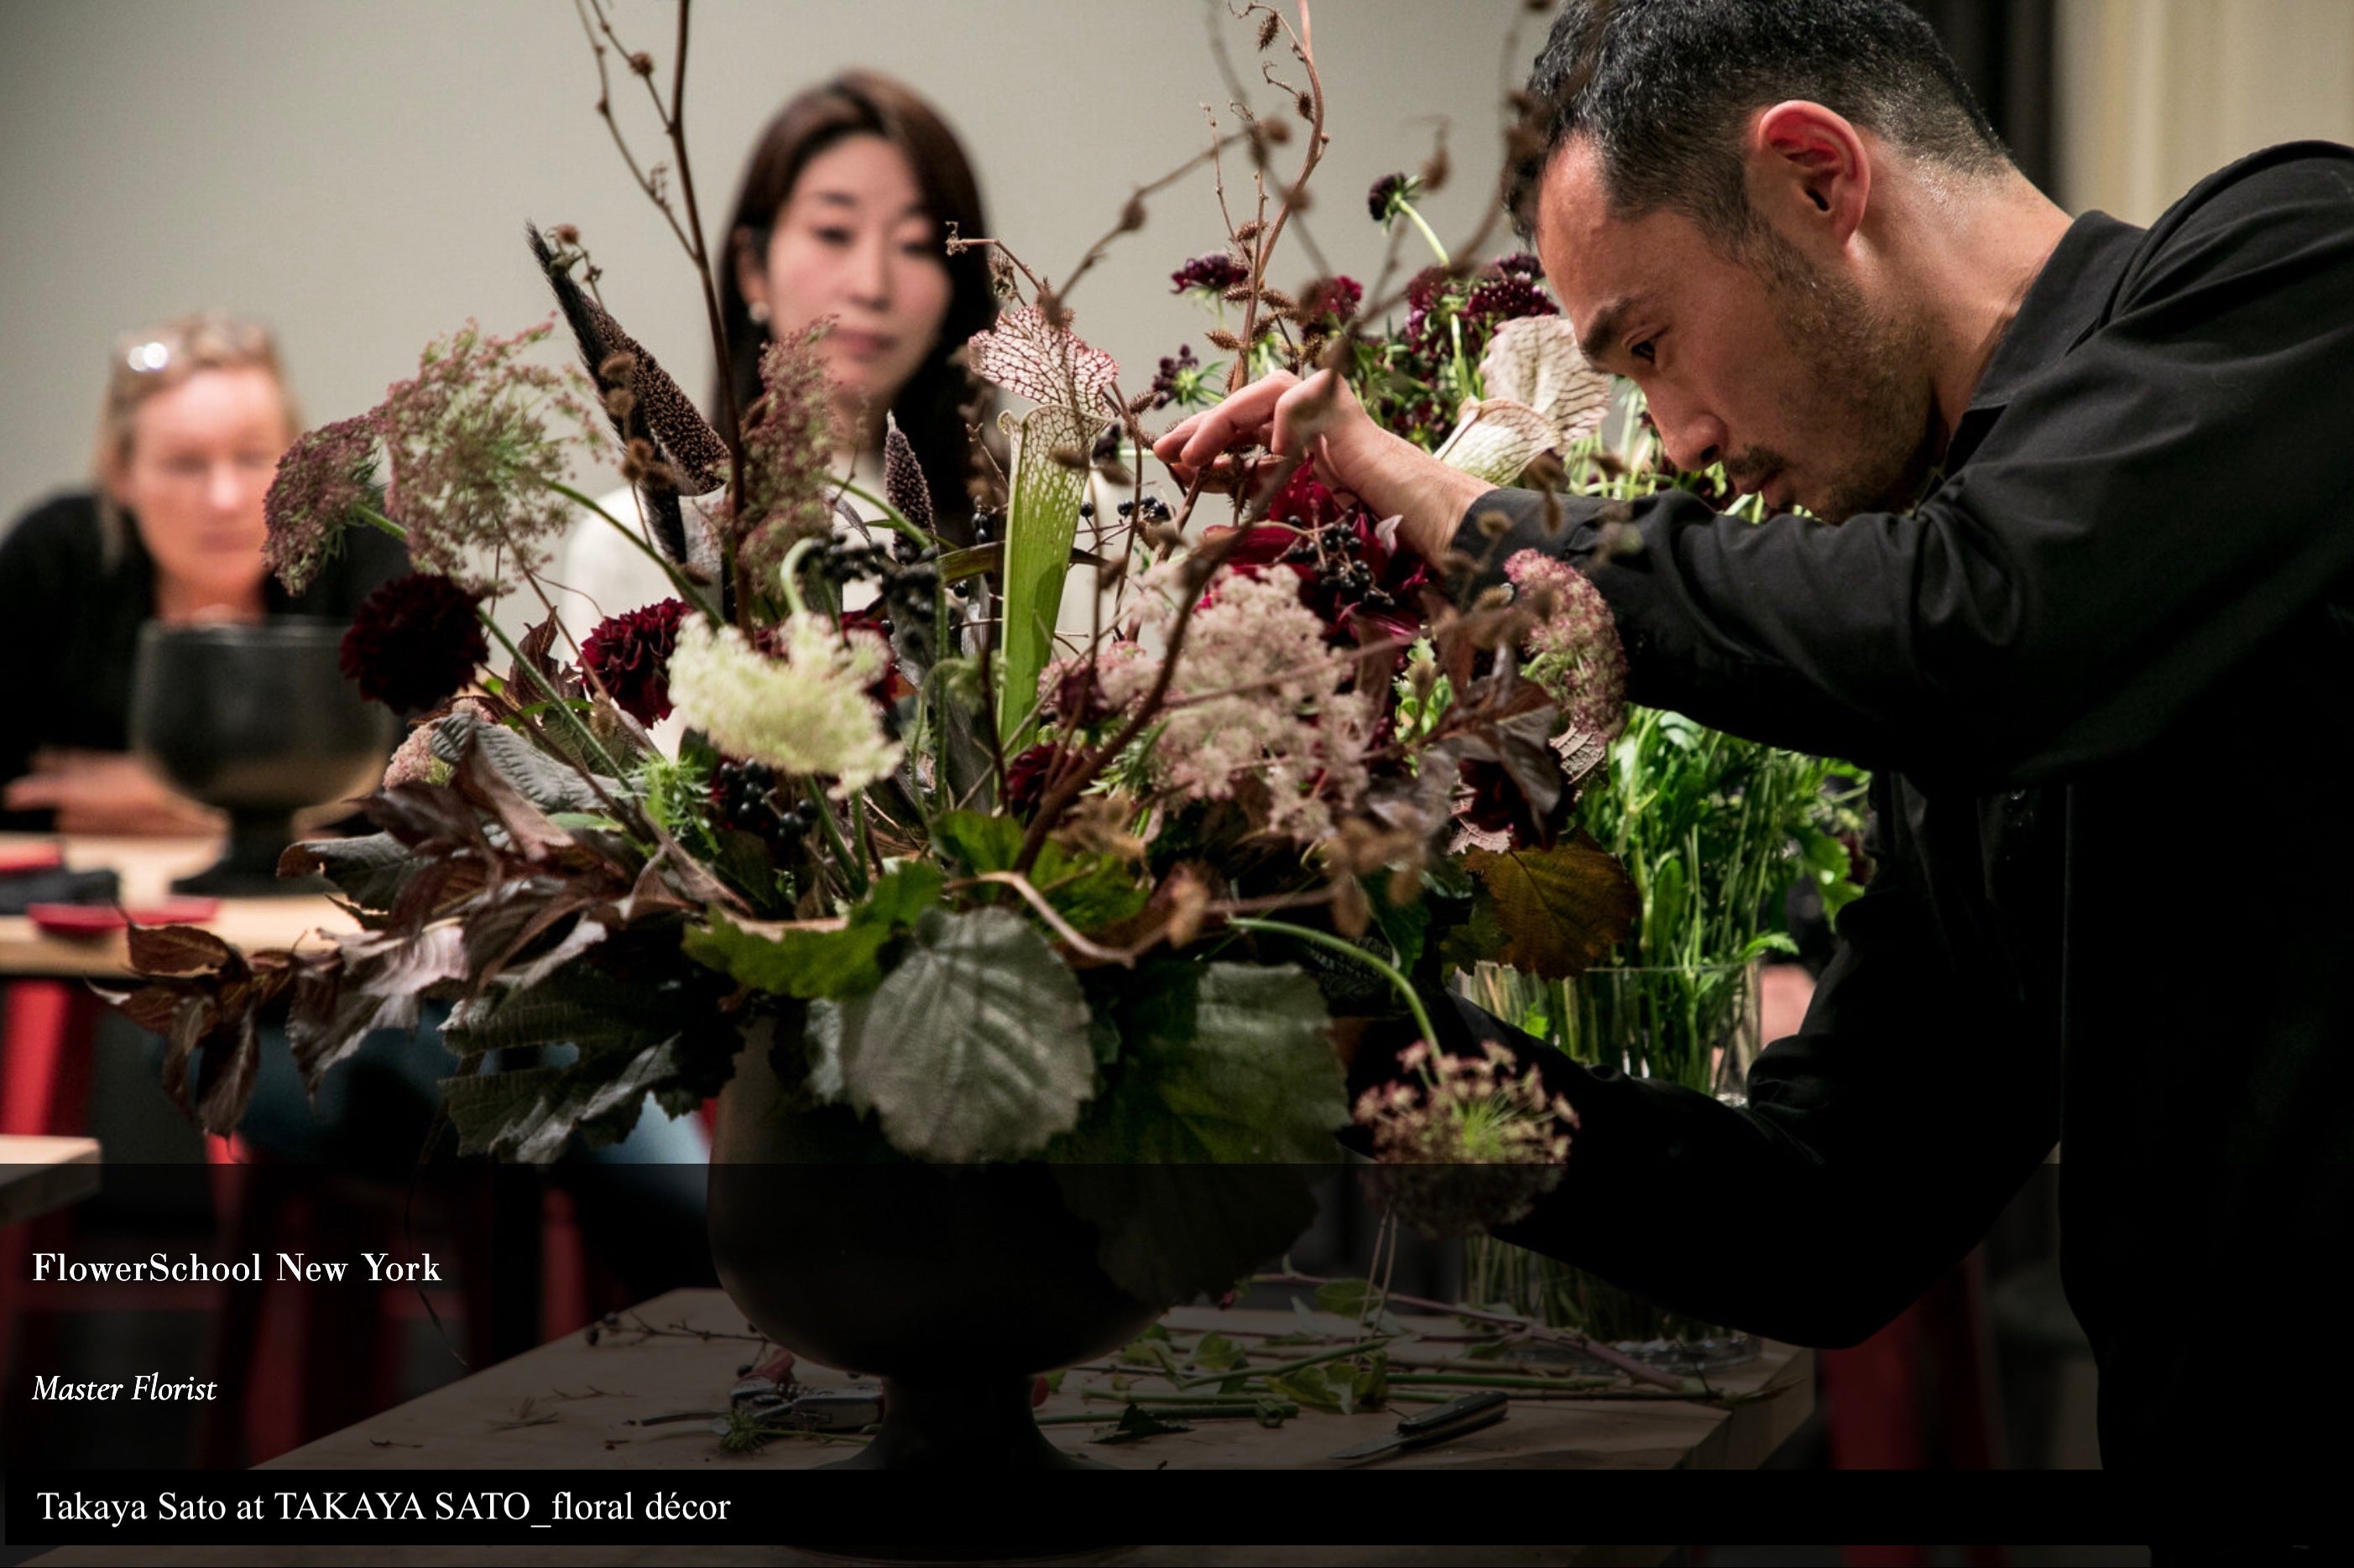 A master floral artist that is teaching customers how to arrange flowers in a vase.